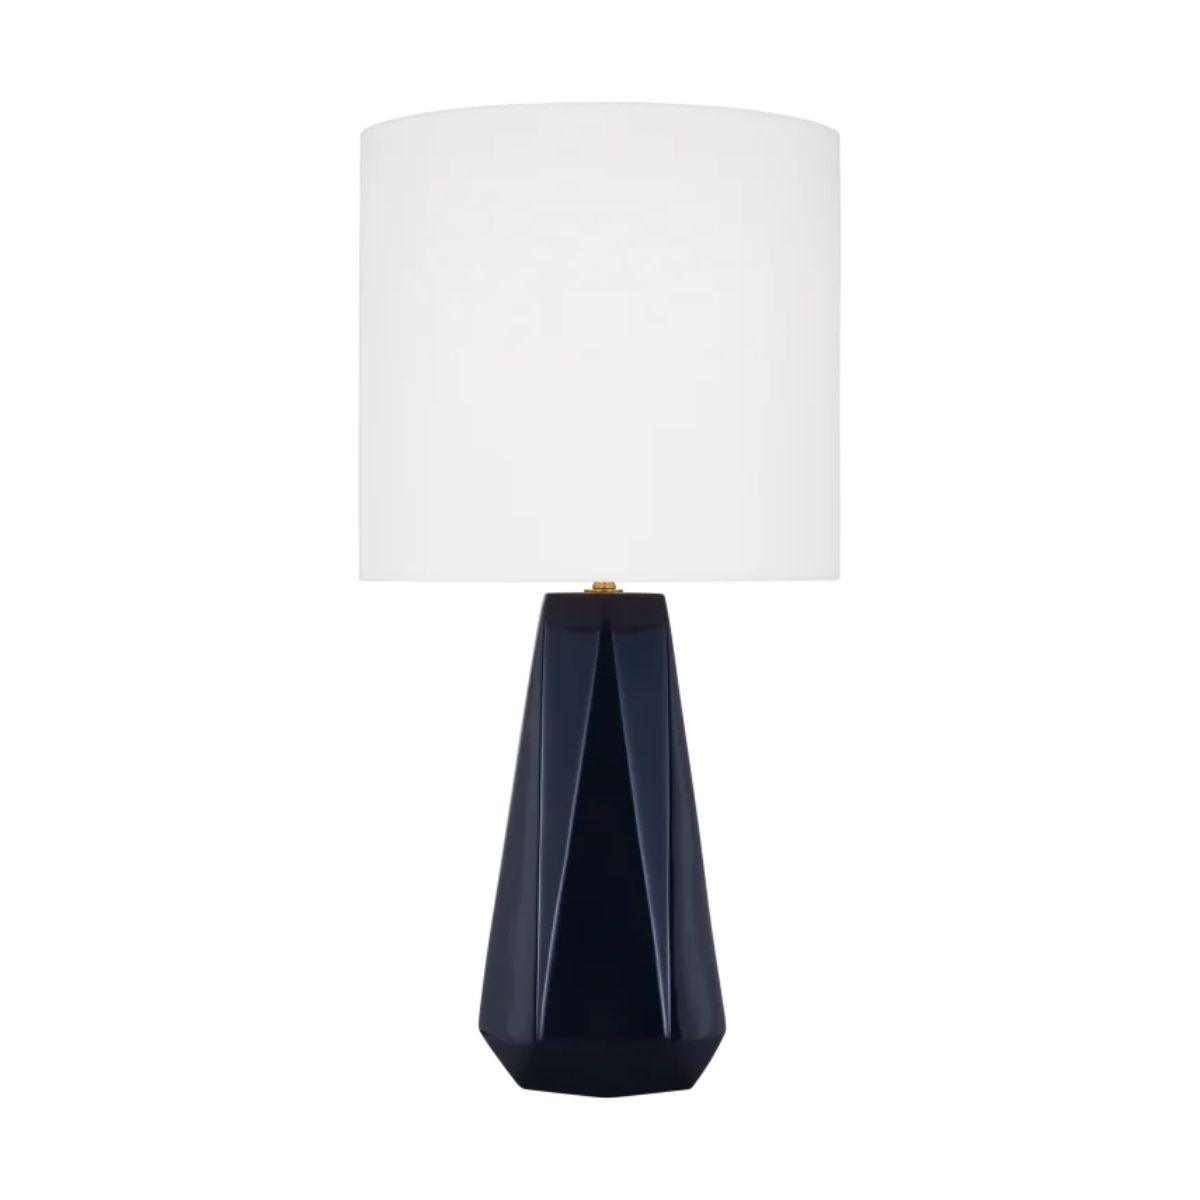 Moresby Medium Table Lamp